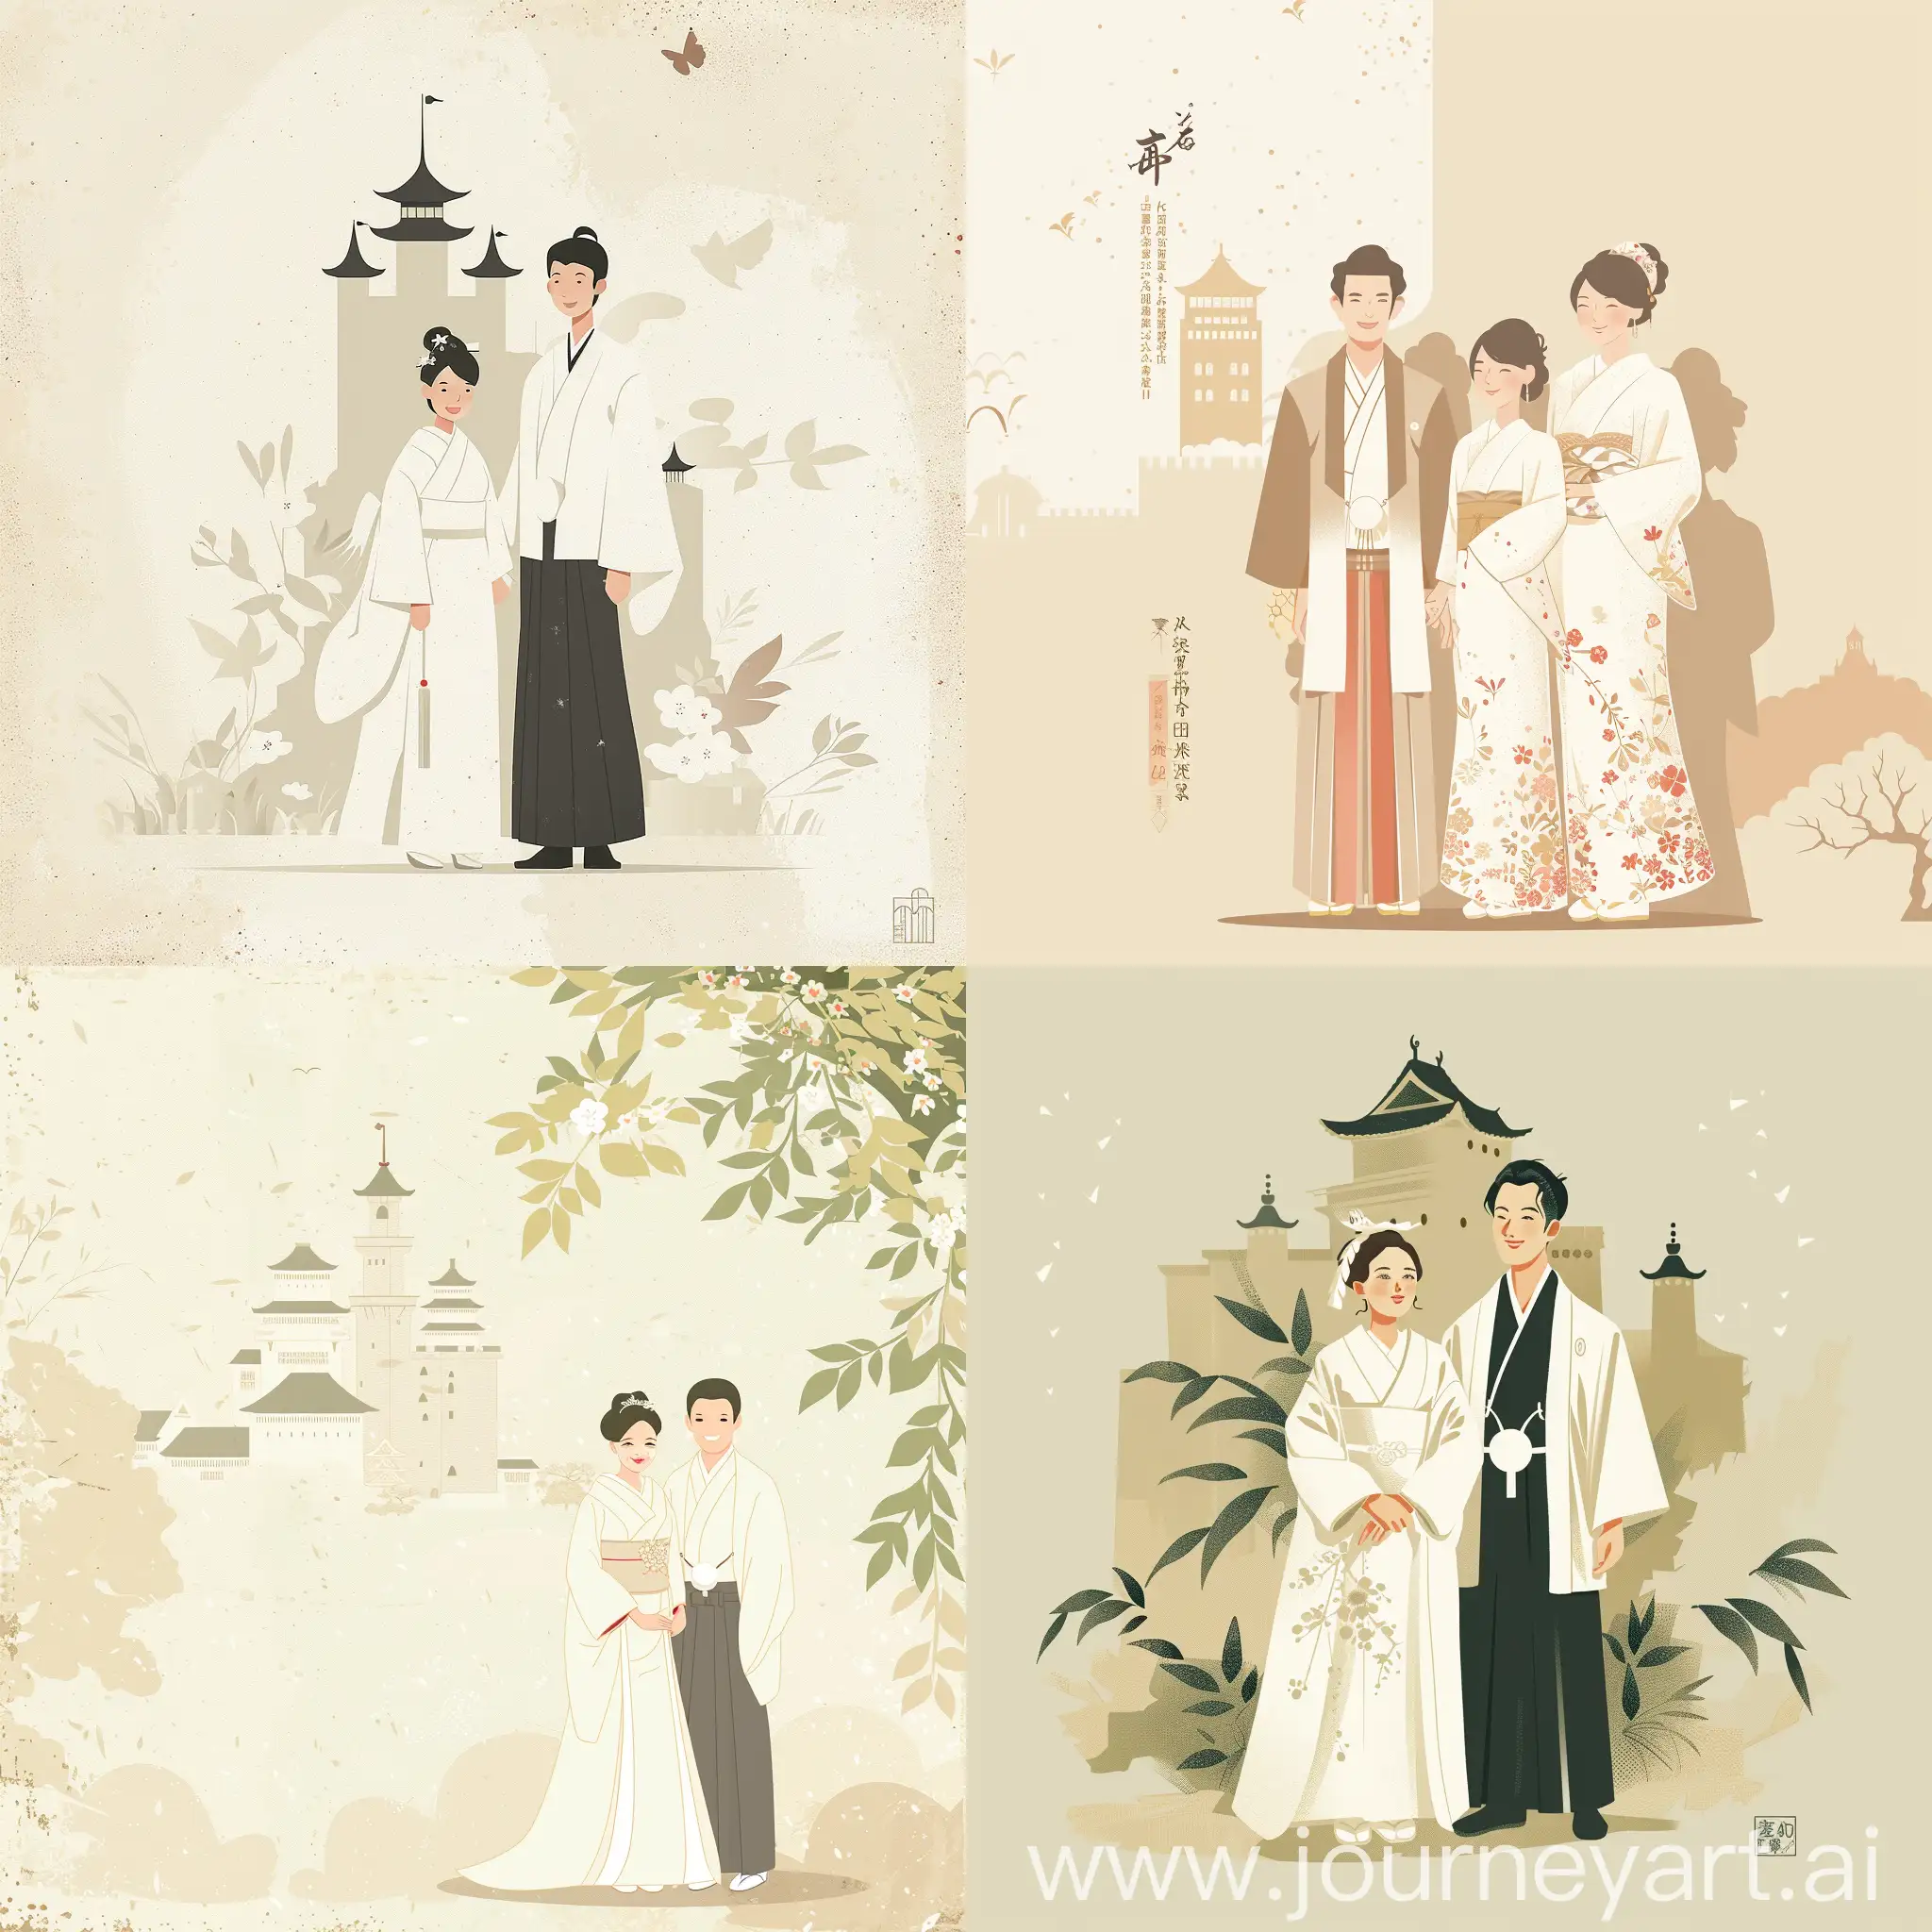 Cottagecore style, japanese a wedding invitation of the pure bride and groom, ((traditional wedding style)) affectionately standing front, white japan style, charming, design, delicate shadows, backround castle, Coexistence, emotional illustration,